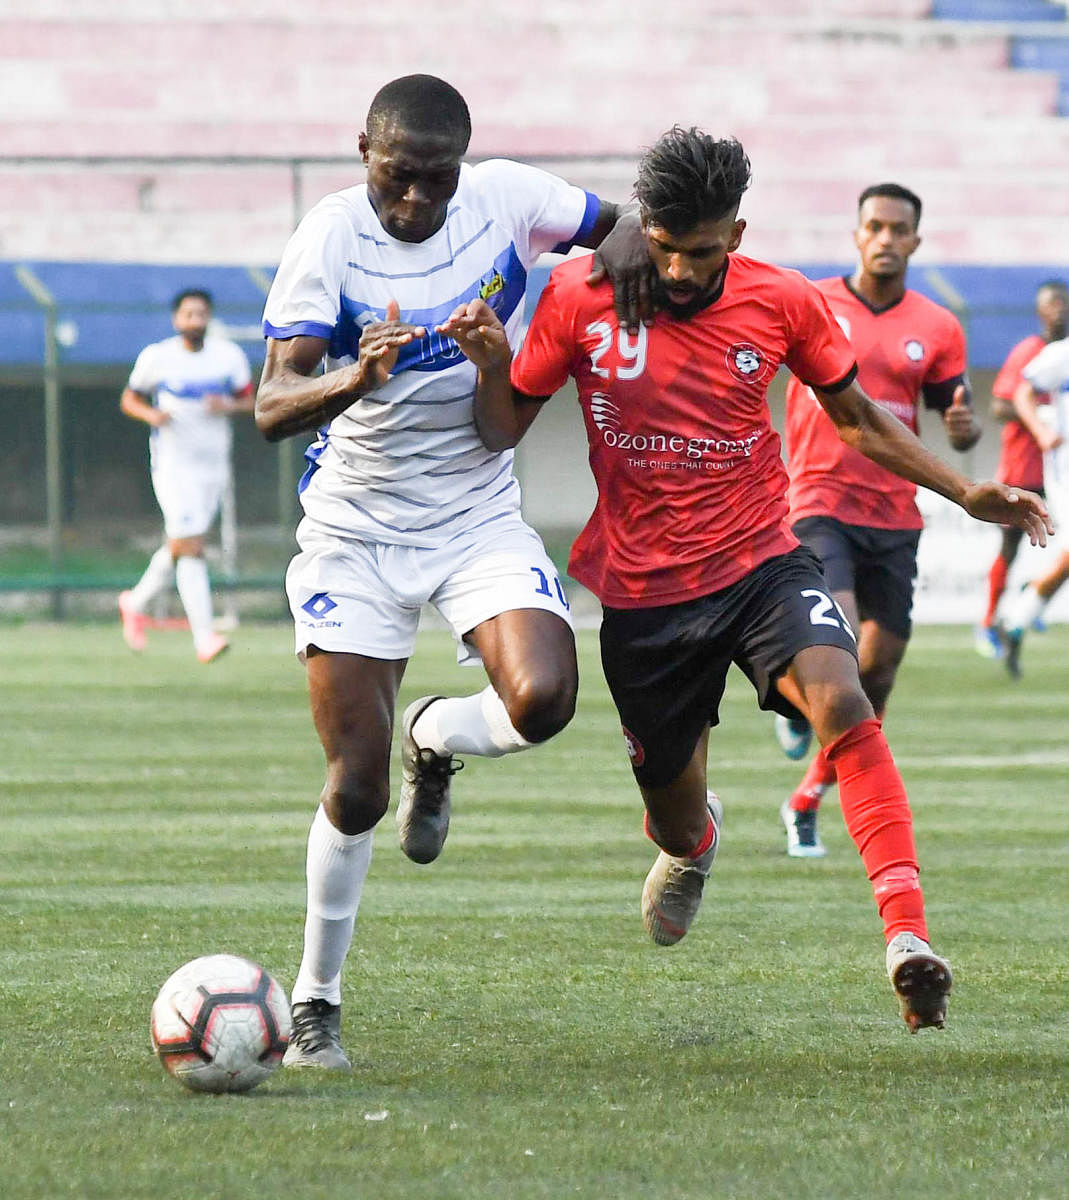 BIG GOALS: Hamza Abullahi (left) of Lonestar Kashmir in action against Ozone FC in the Second Division League. Hamza has played for many clubs in India and even has a home in Bengaluru. DH photo/ B H Shivakumar